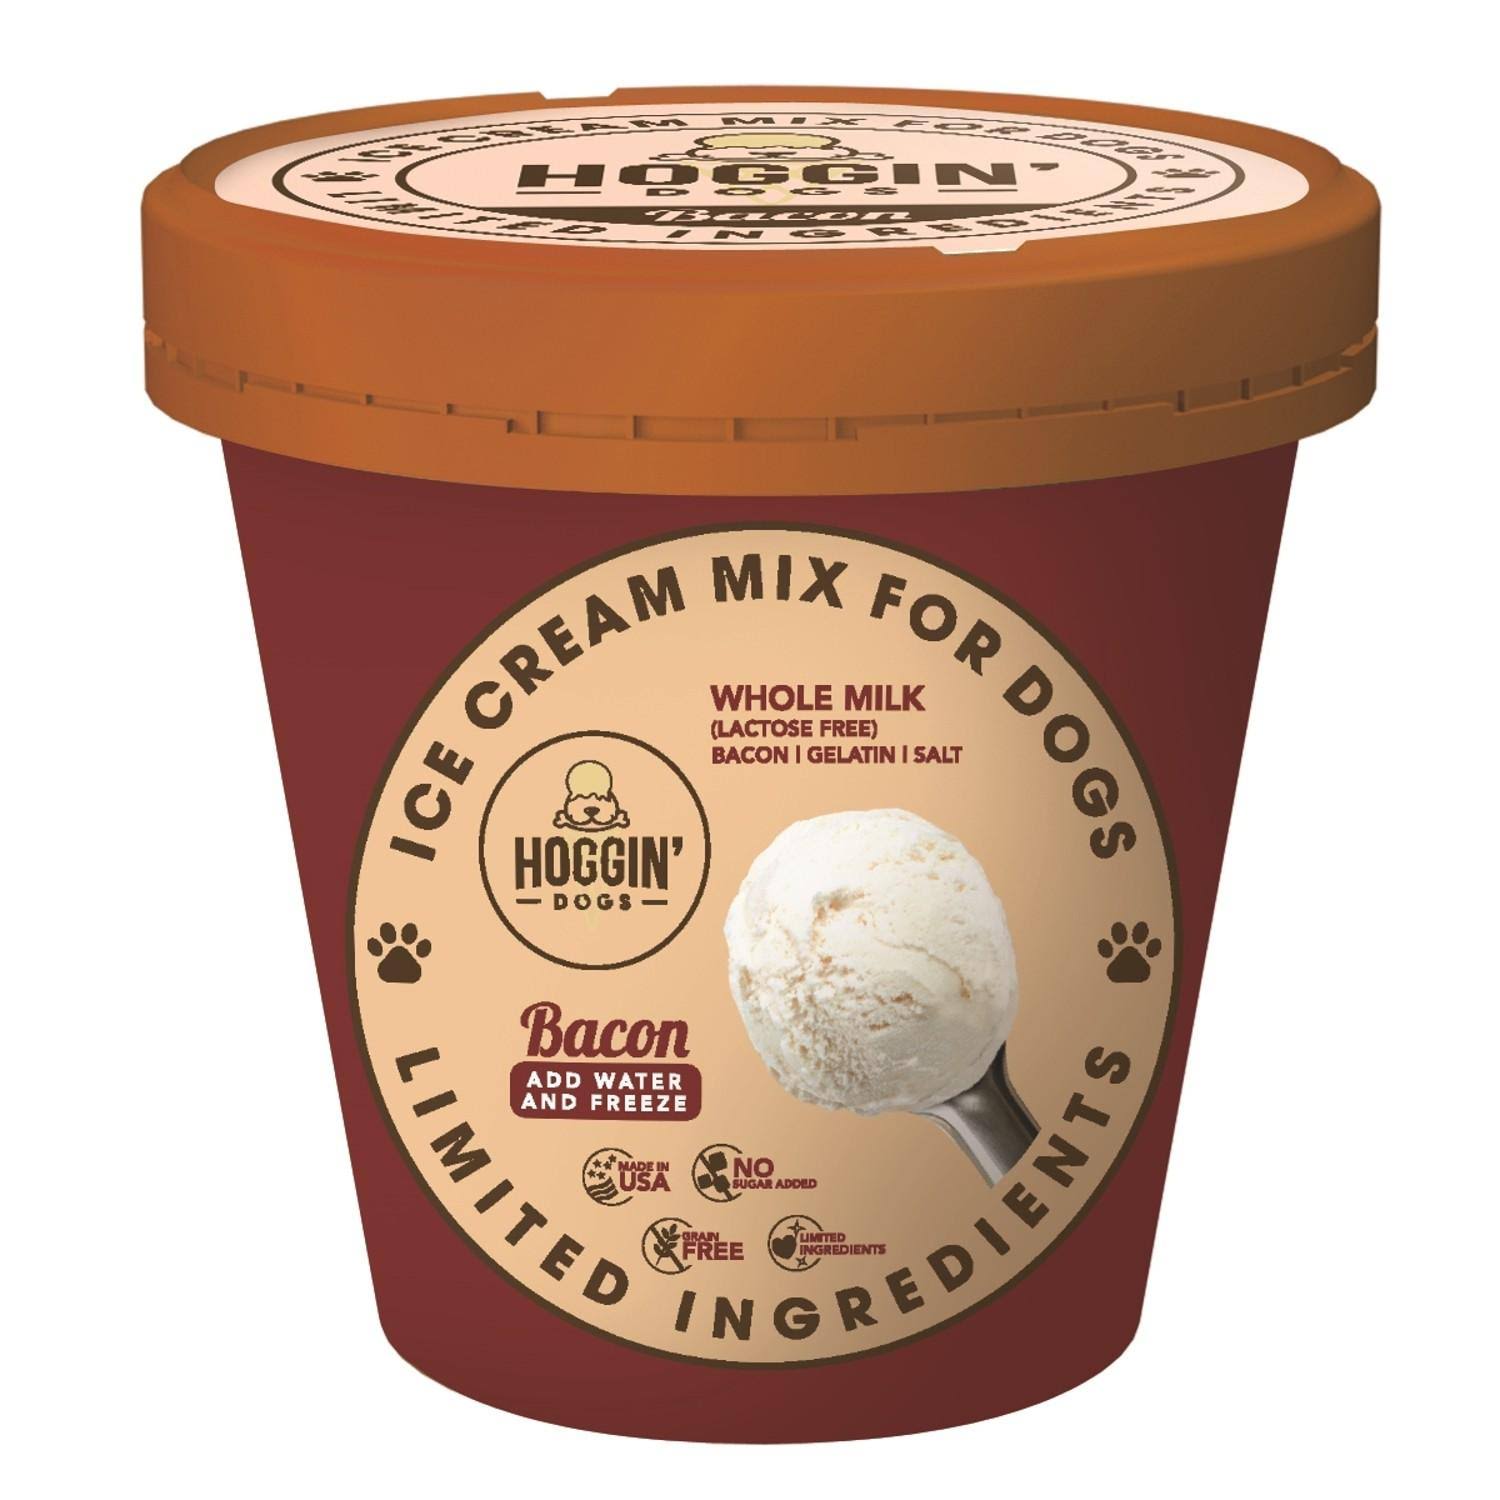 Hoggin' Dogs Ice Cream Mix for Dogs (Bacon)